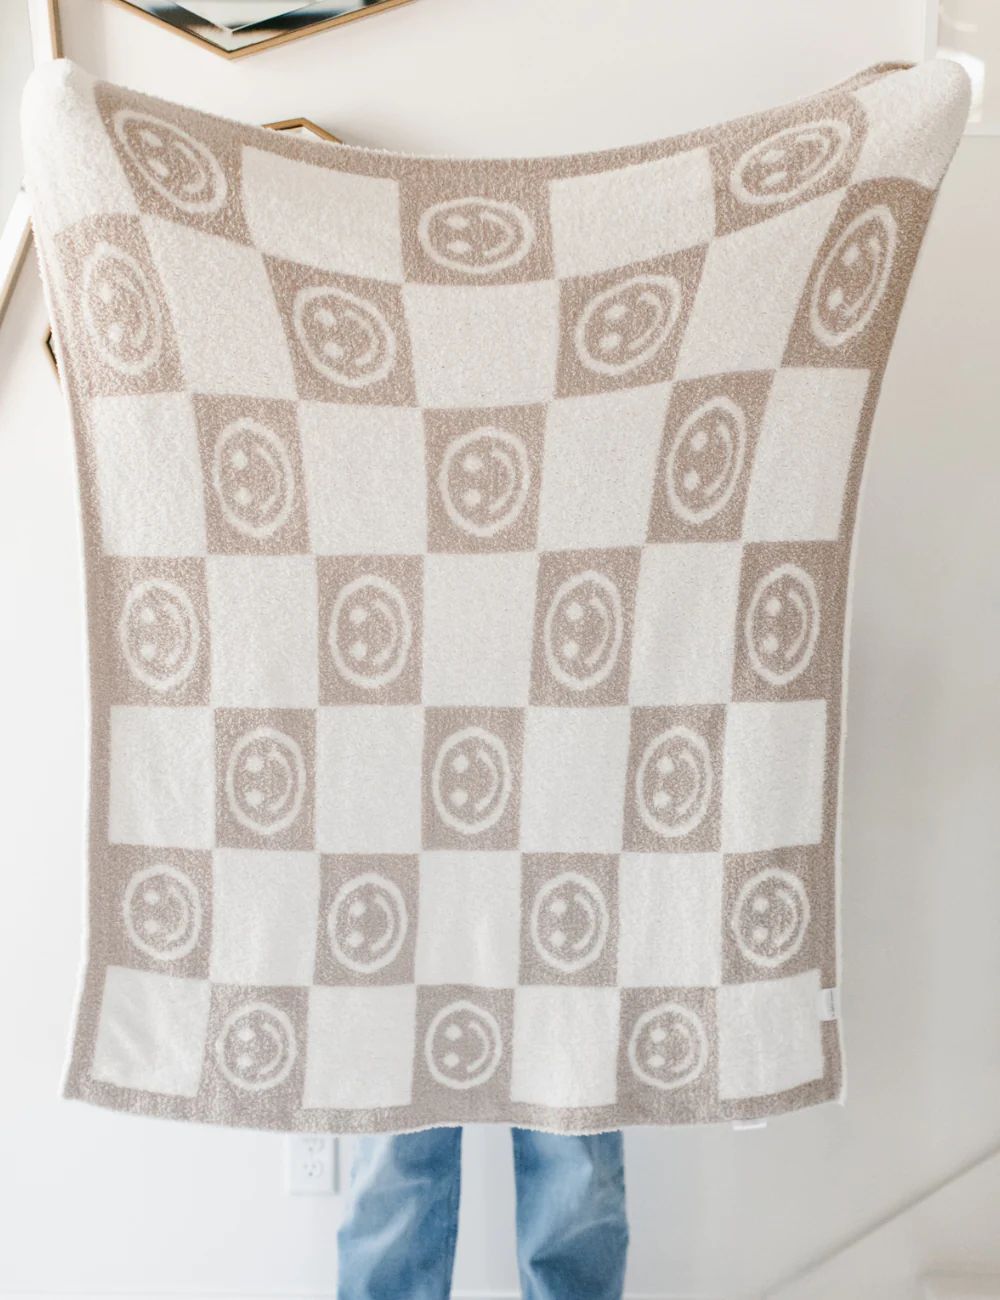 TSC x Tia Booth: Checkered Smiley Children's Blanket | The Styled Collection